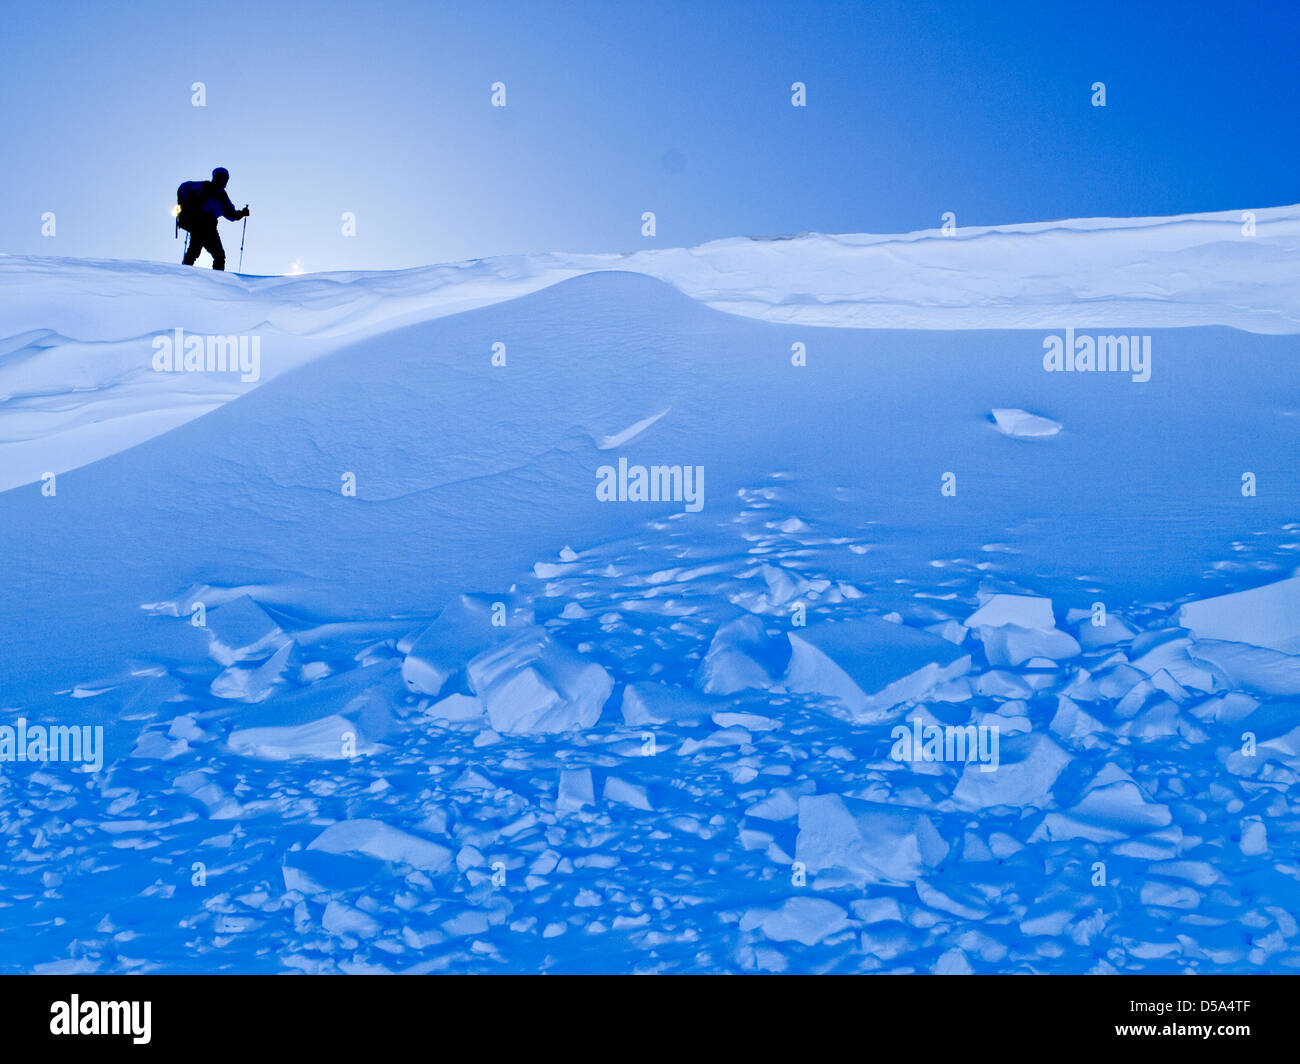 Ski touring in Northern Norway a skier at the top of a slope with avalanche debris below Stock Photo